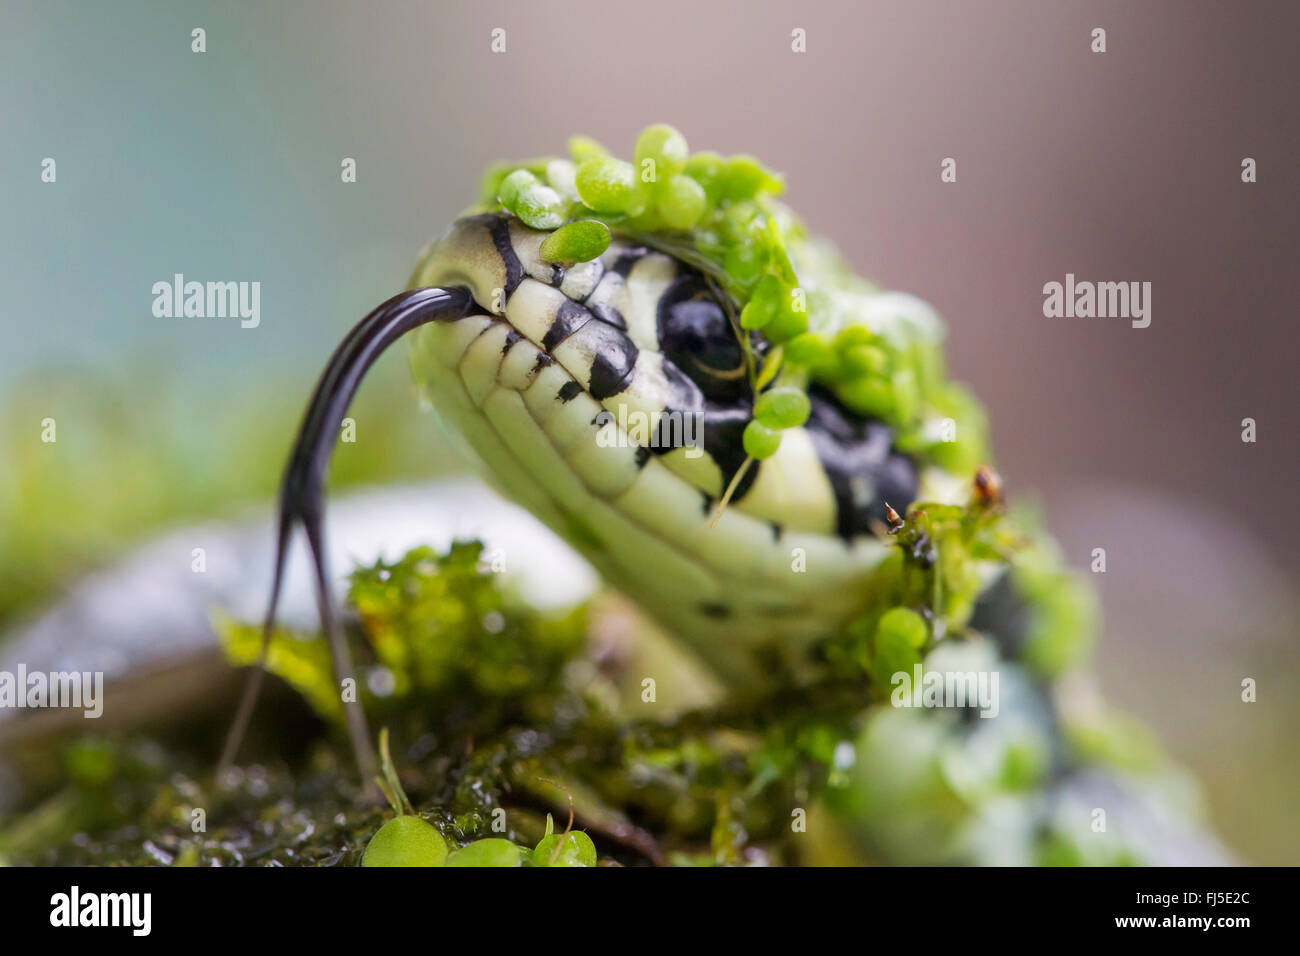 grass snake (Natrix natrix), surfacing between duckweeds and darting tongue in and out, portrait, Germany, Bavaria, Niederbayern, Lower Bavaria Stock Photo